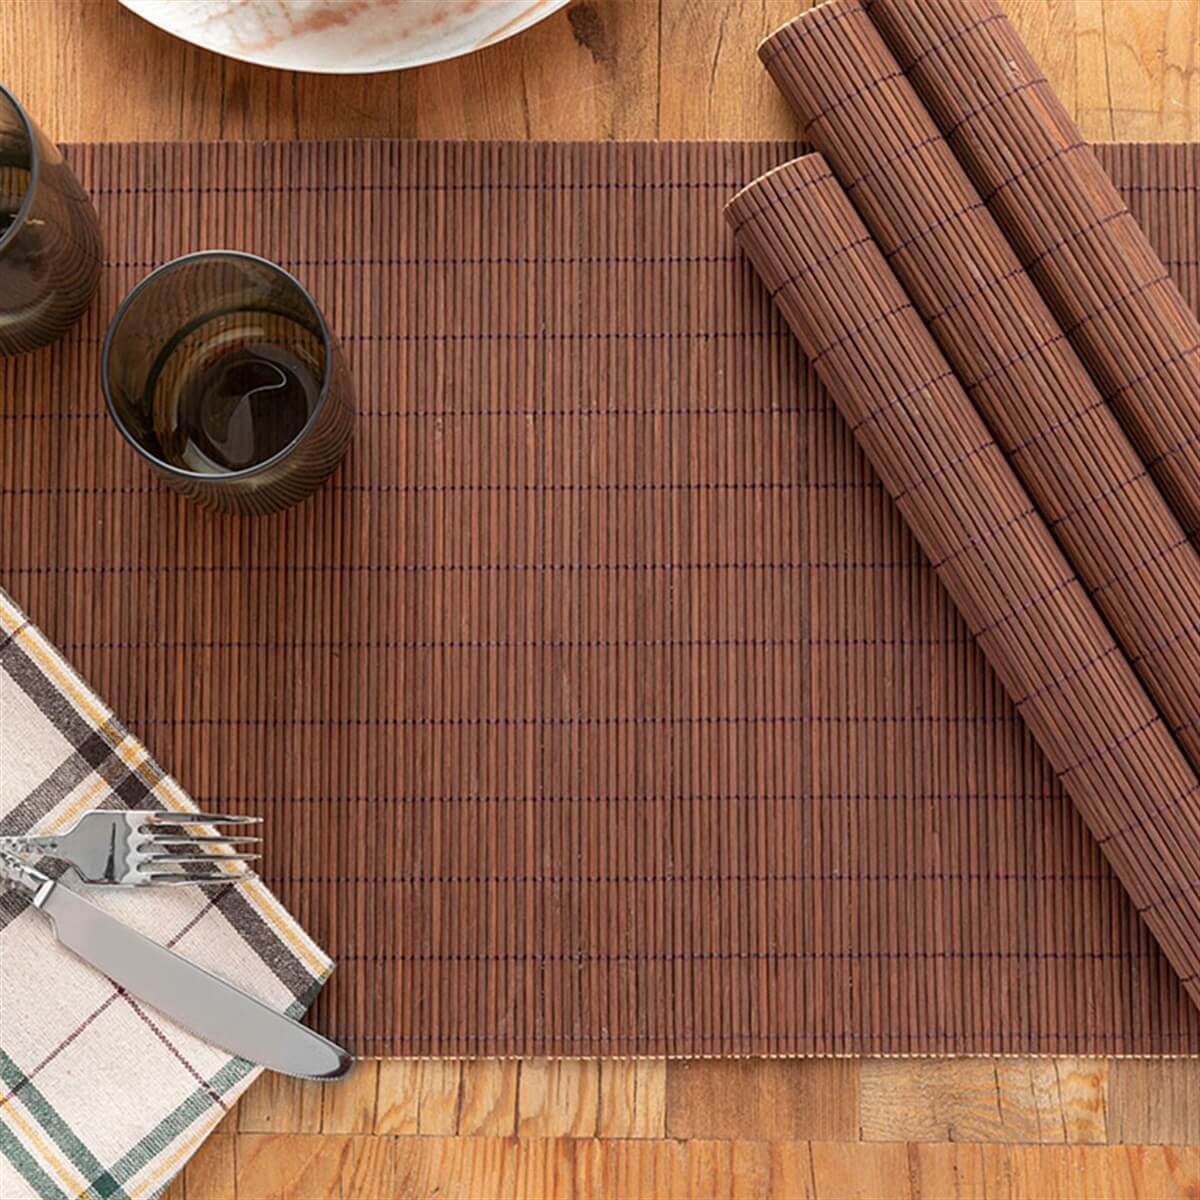 English Home Martinez Bamboo Placemat Brown Set of 4 - Shop Home Textile at Baqqalia.com - Best Brands and Products - Free Worldwide Shipping Over $150